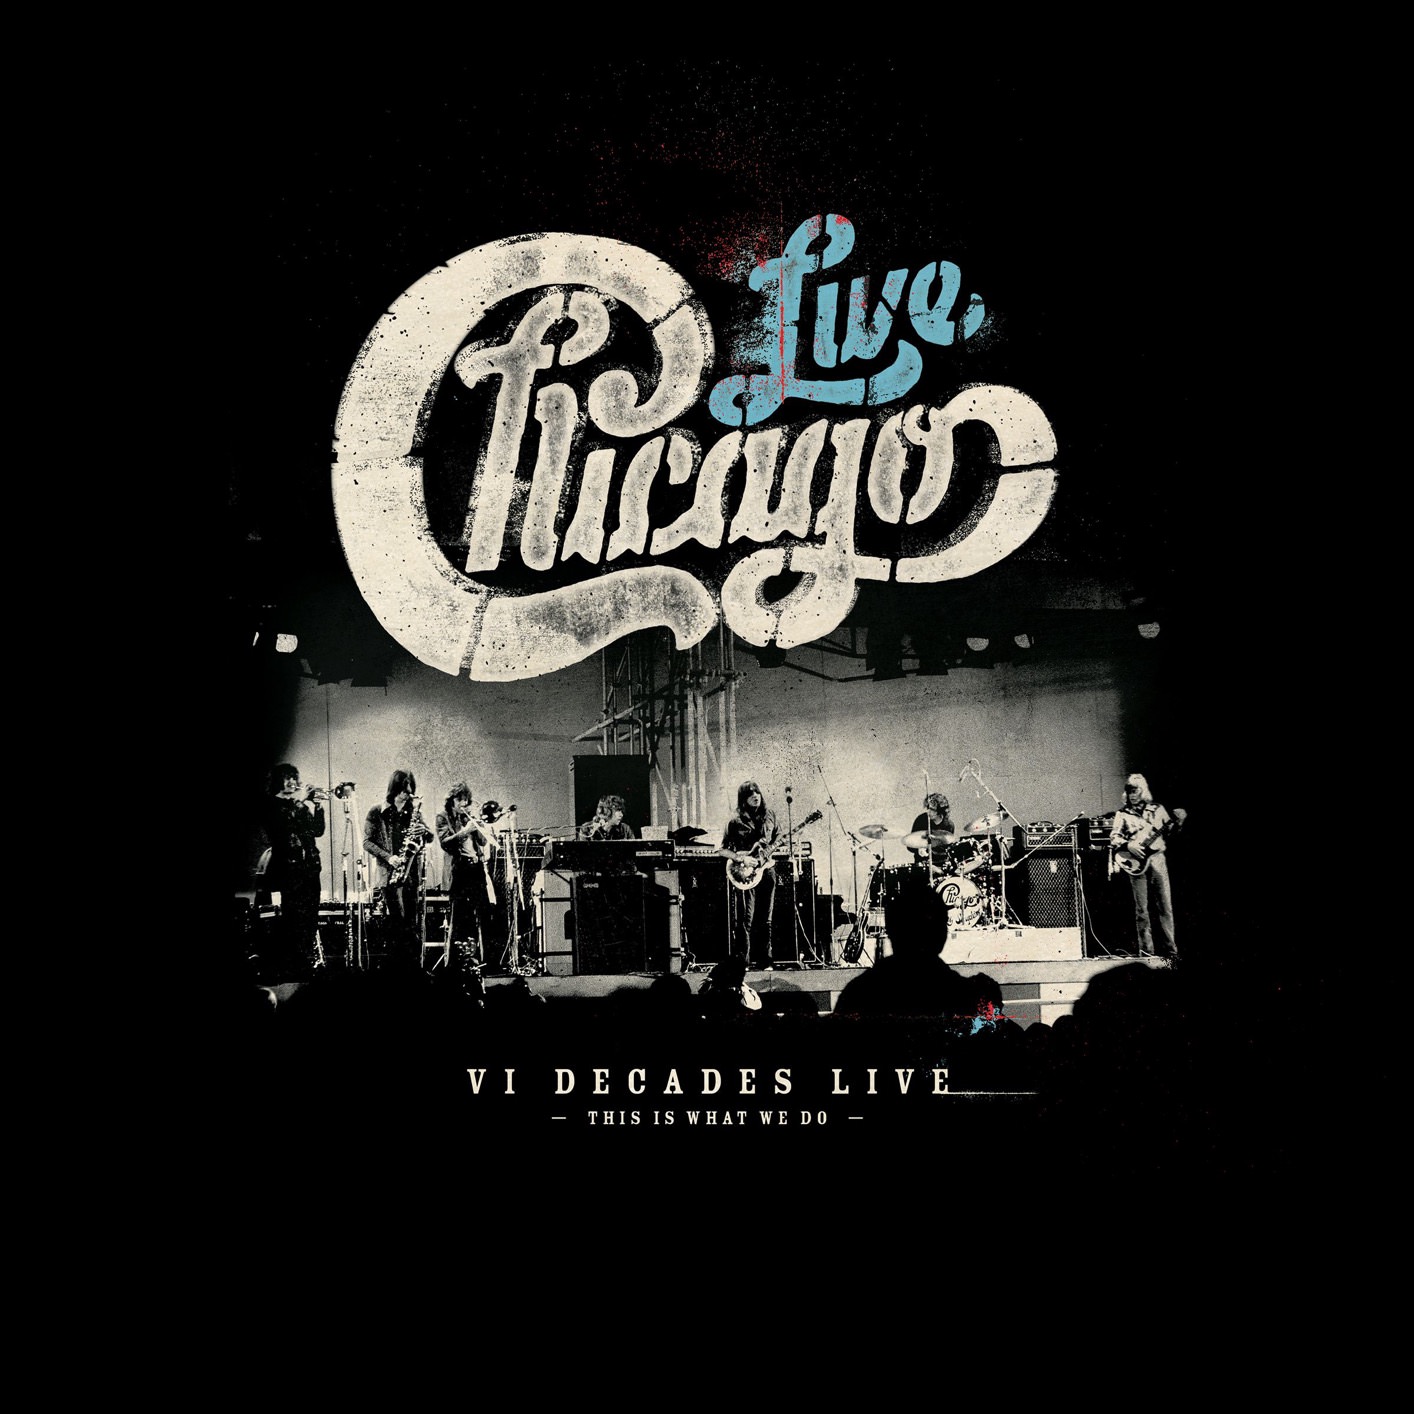 Chicago – Chicago: VI Decades Live (This Is What We Do) (2018) [FLAC 24bit/44,1kHz]